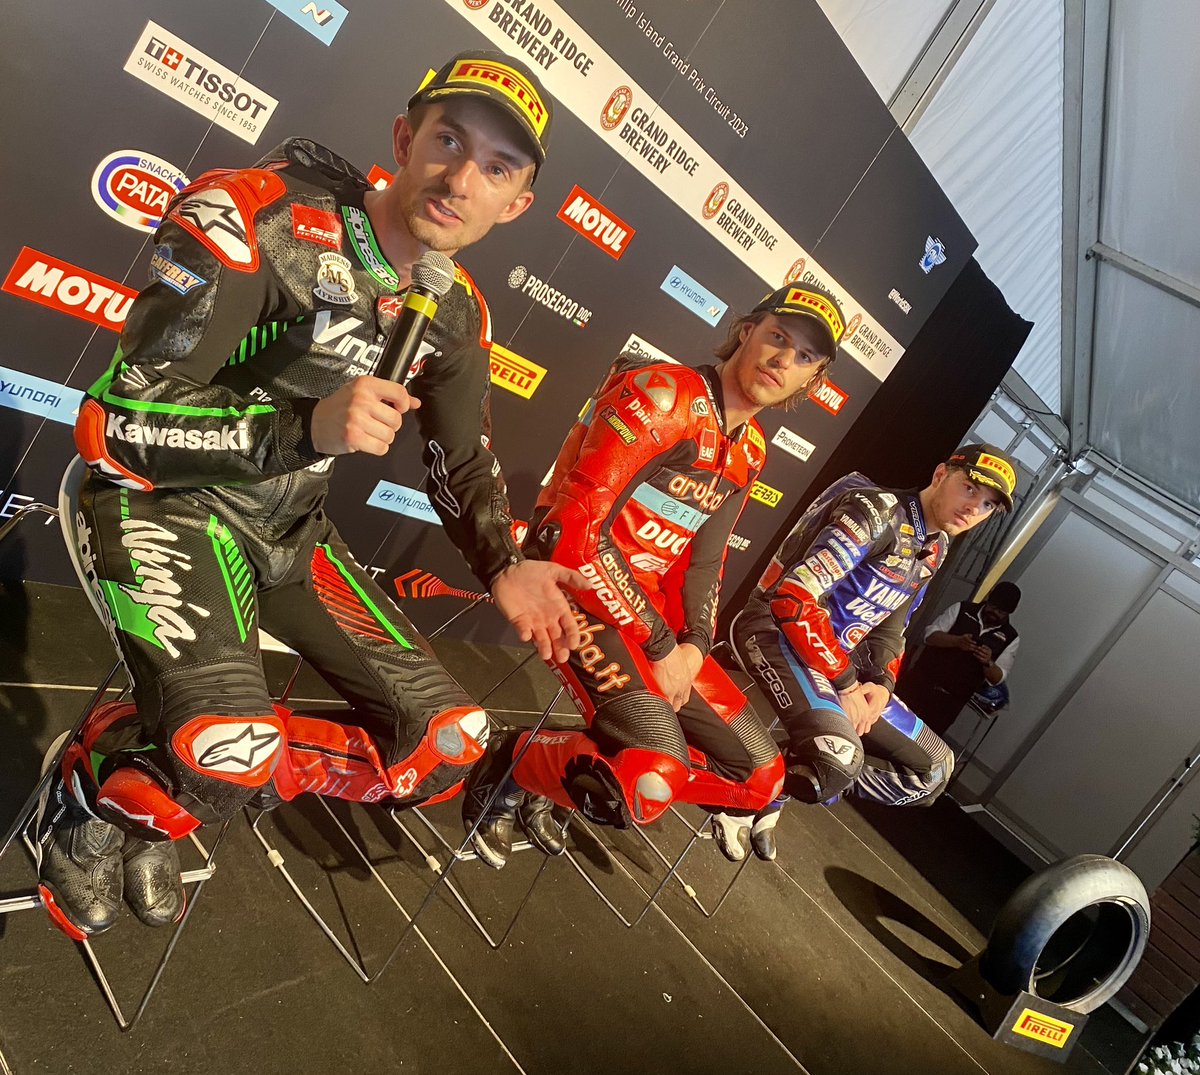 A first time #WorldSSP race winner and two first timers on the podium in their SSP race debuts. What a crazy start to the season. Congrats guys #AUSWorldSBK #Bulega #McPhee #Spinelli